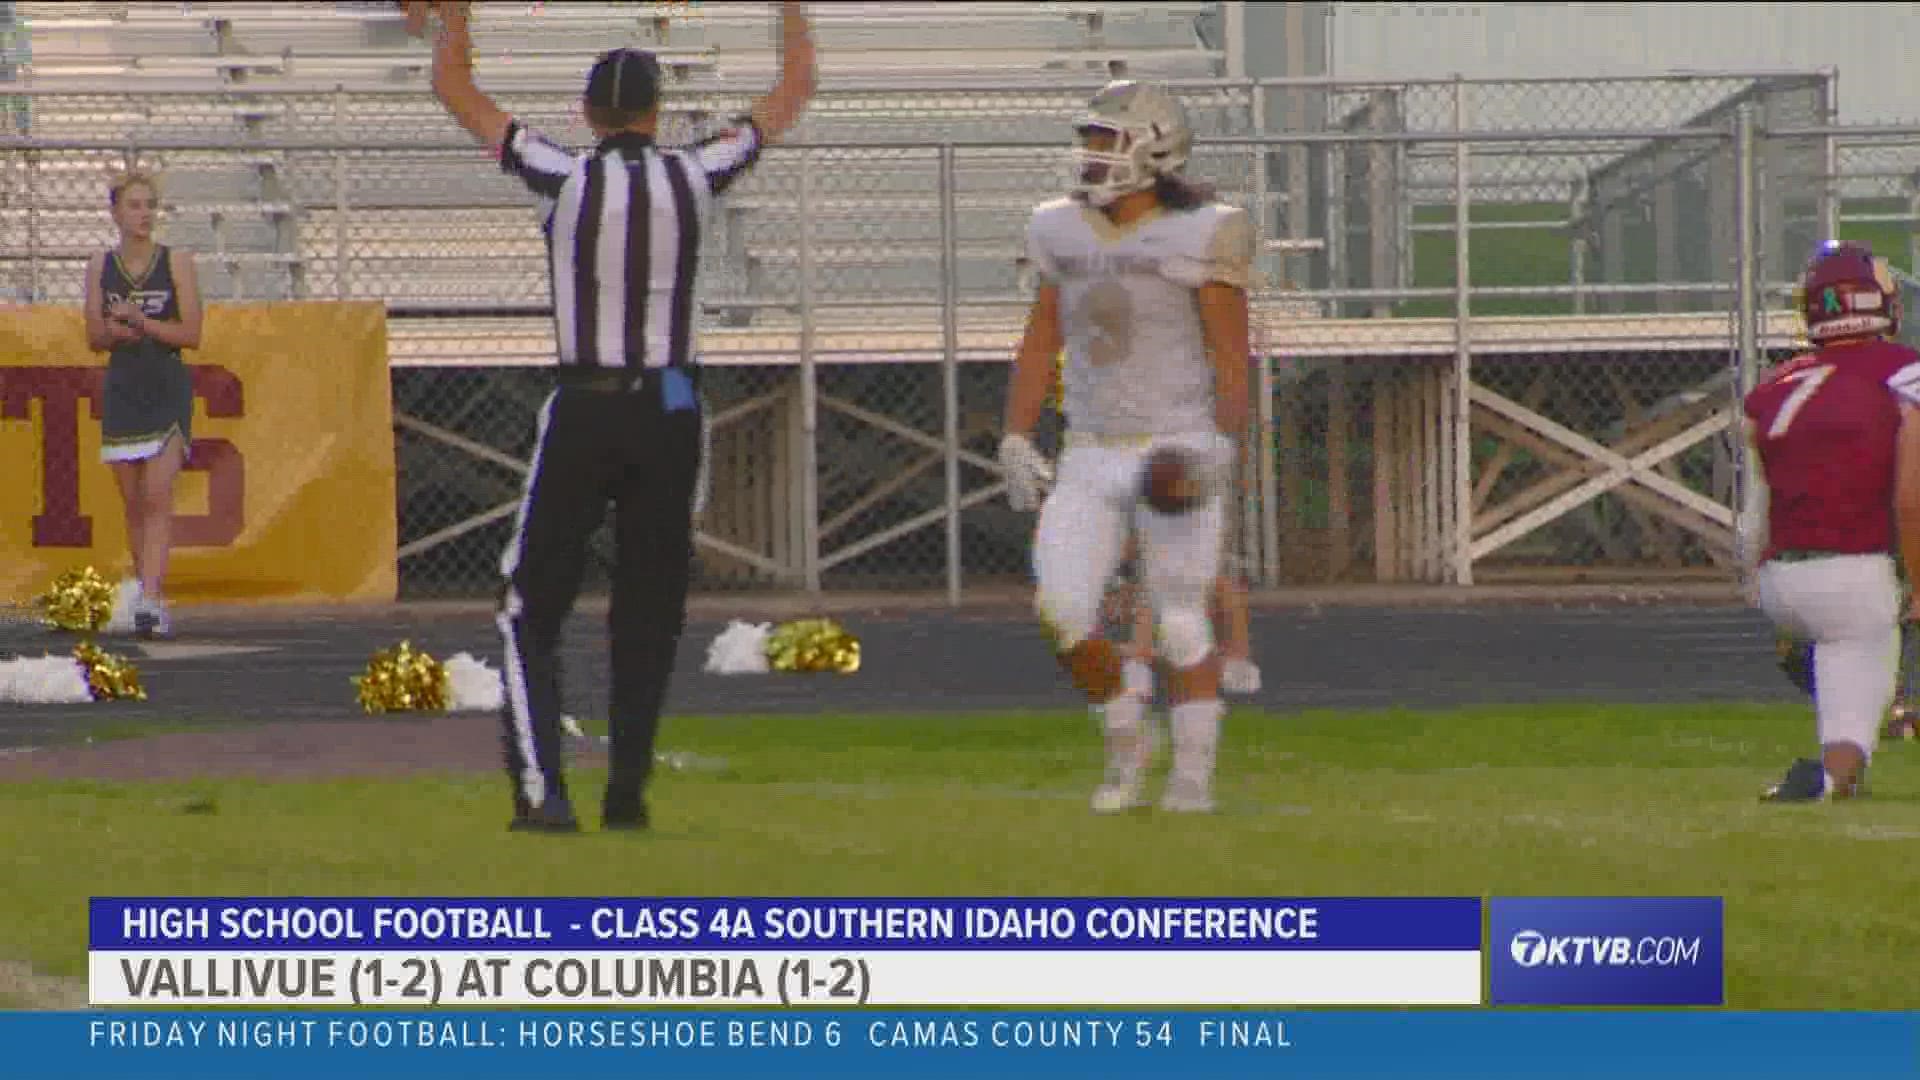 Vallivue's offense rolled Friday night, leading the Falcons (2-2) to a 38-6 Week 4 win over the Columbia Wildcats (1-3).